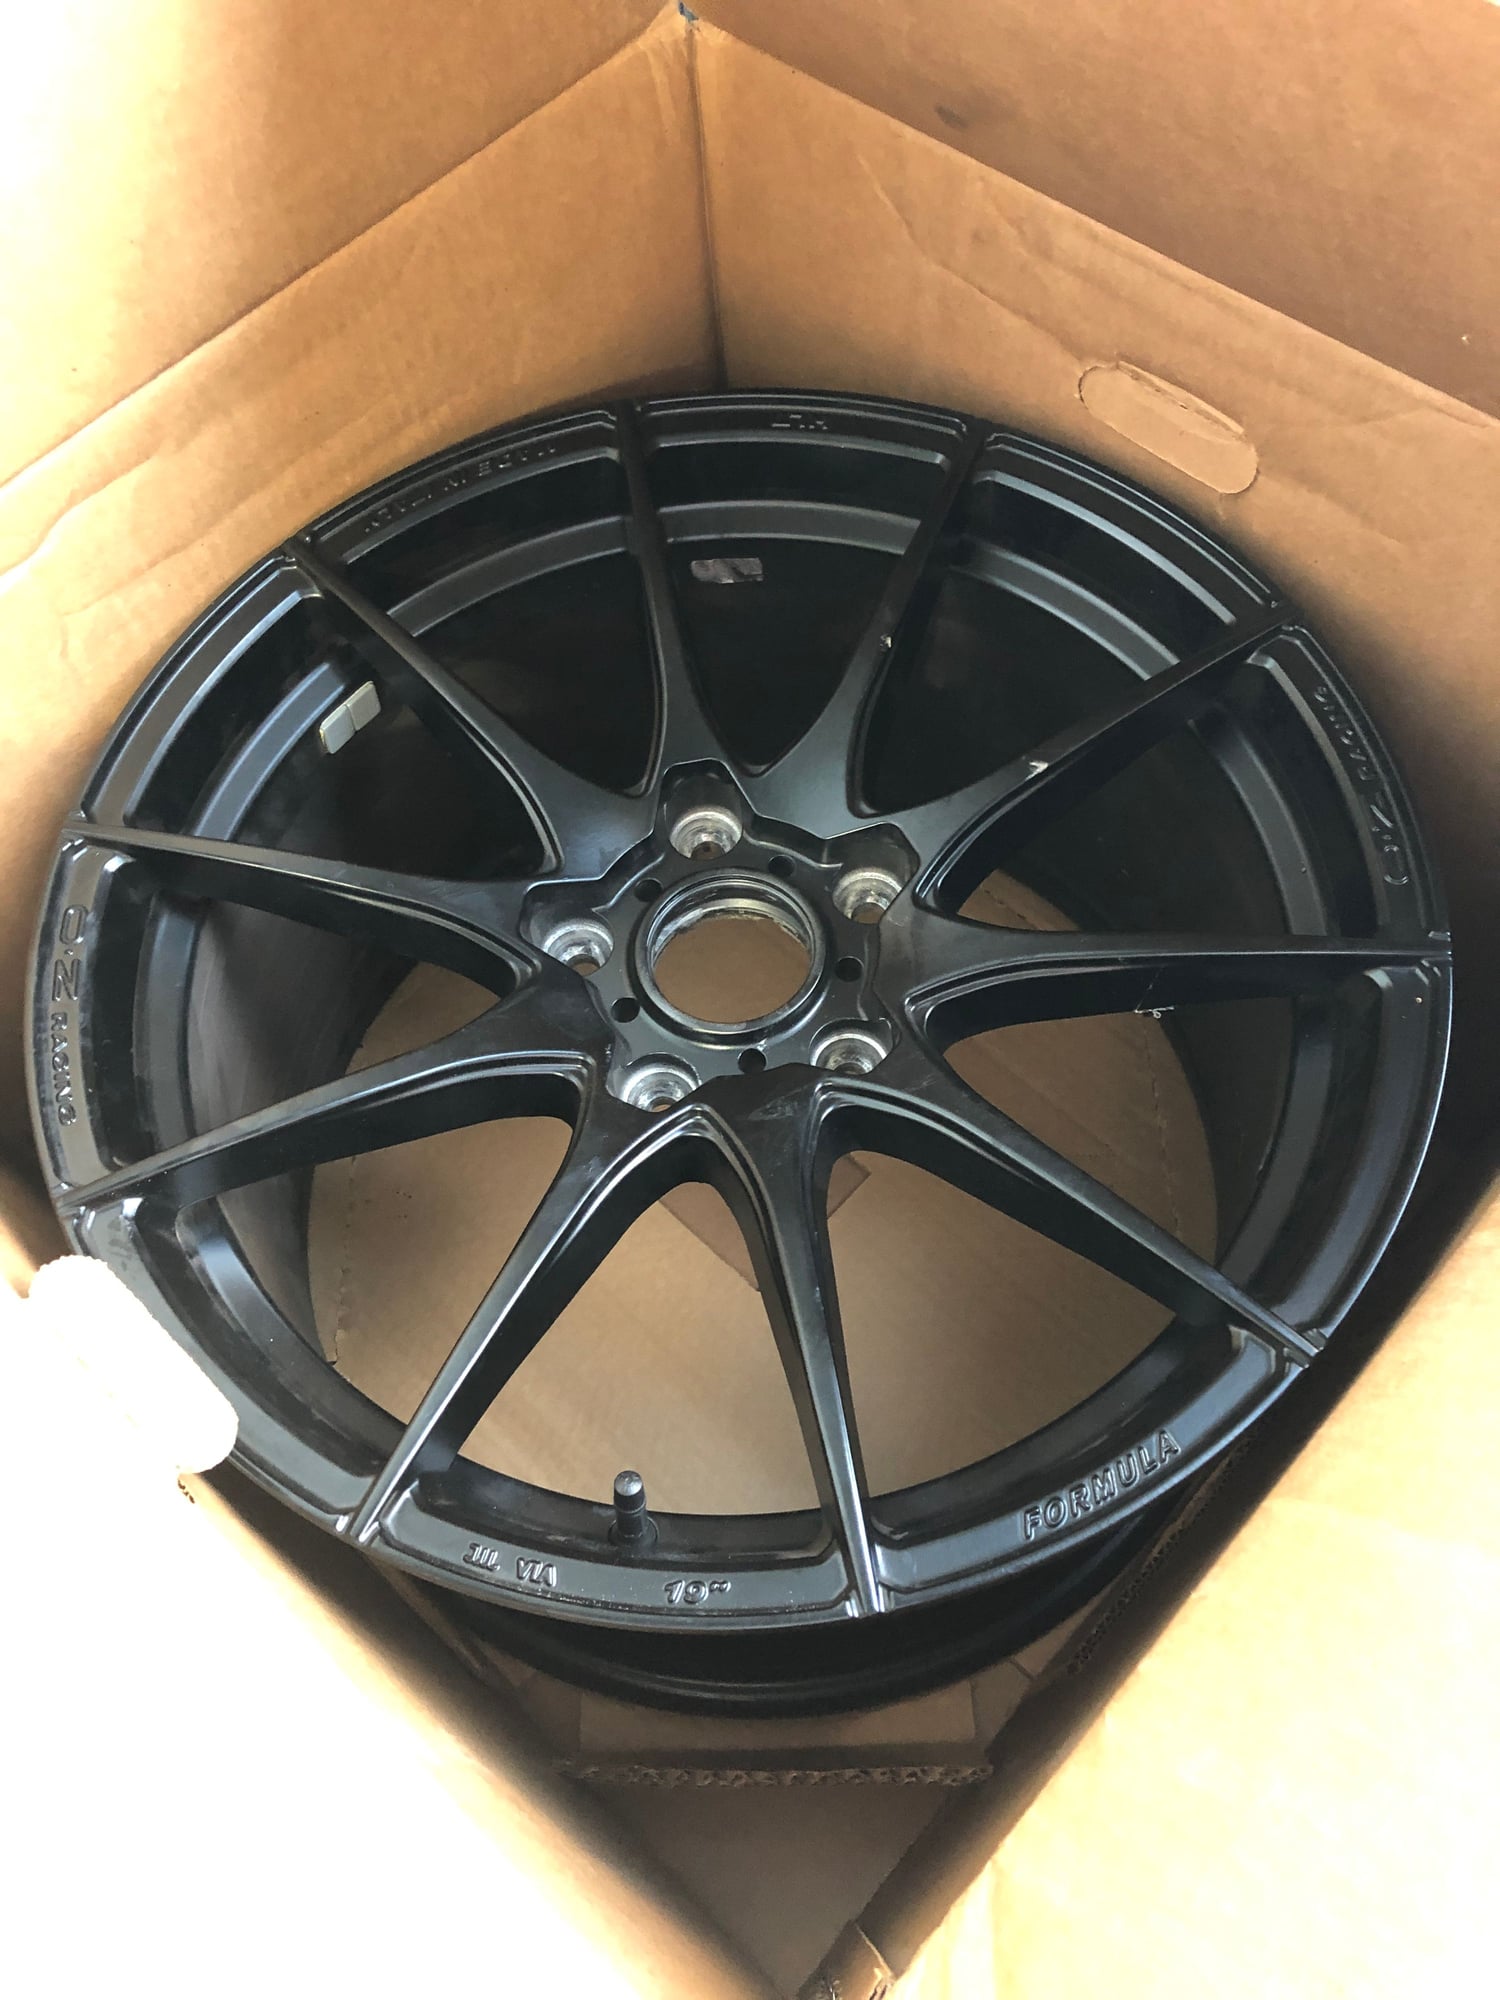 Wheels and Tires/Axles - Porsche 991 OZ Wheels - Black - 19" for Track use - Used - 2012 to 2019 Porsche 911 - Fort Lauderdale, FL 33331, United States